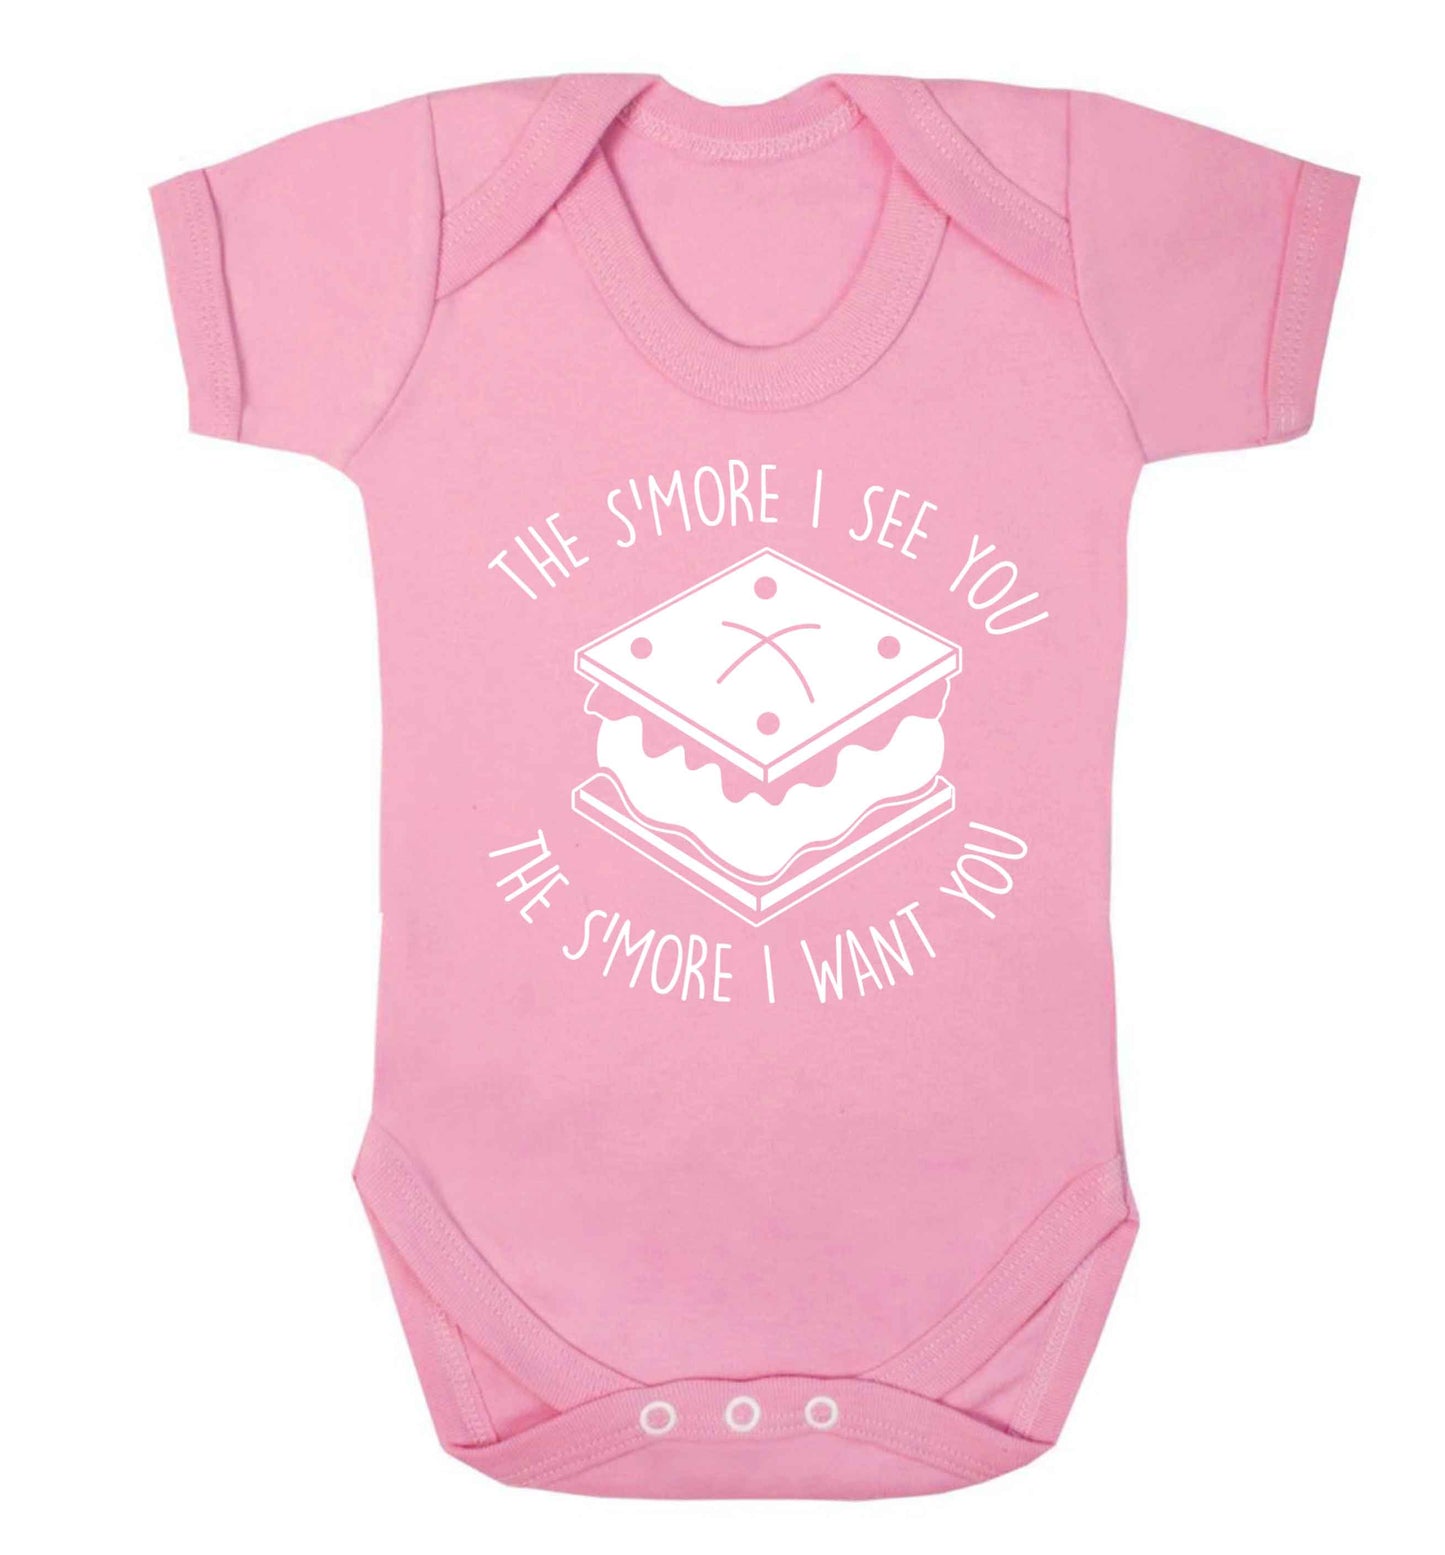 The s'more I see you the s'more I want you Baby Vest pale pink 18-24 months